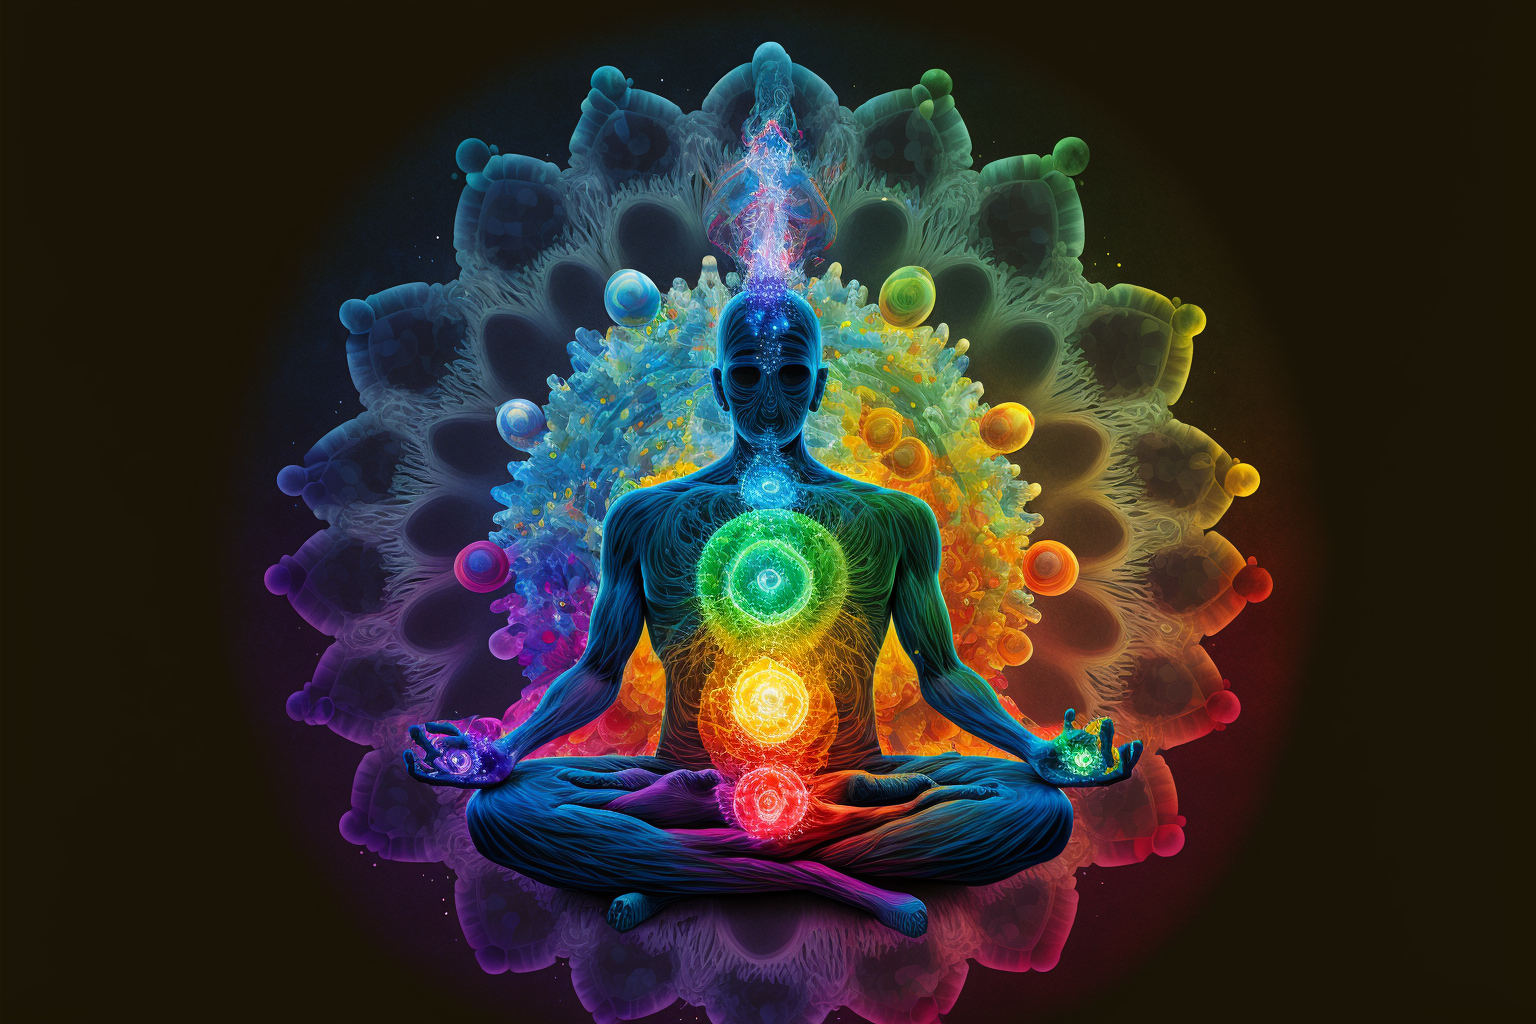 antjuan_energetic_being_sitting_in_lotus_position_while_meditat_019748cb-215b-408e-b7e9-09c52bf821a9.png